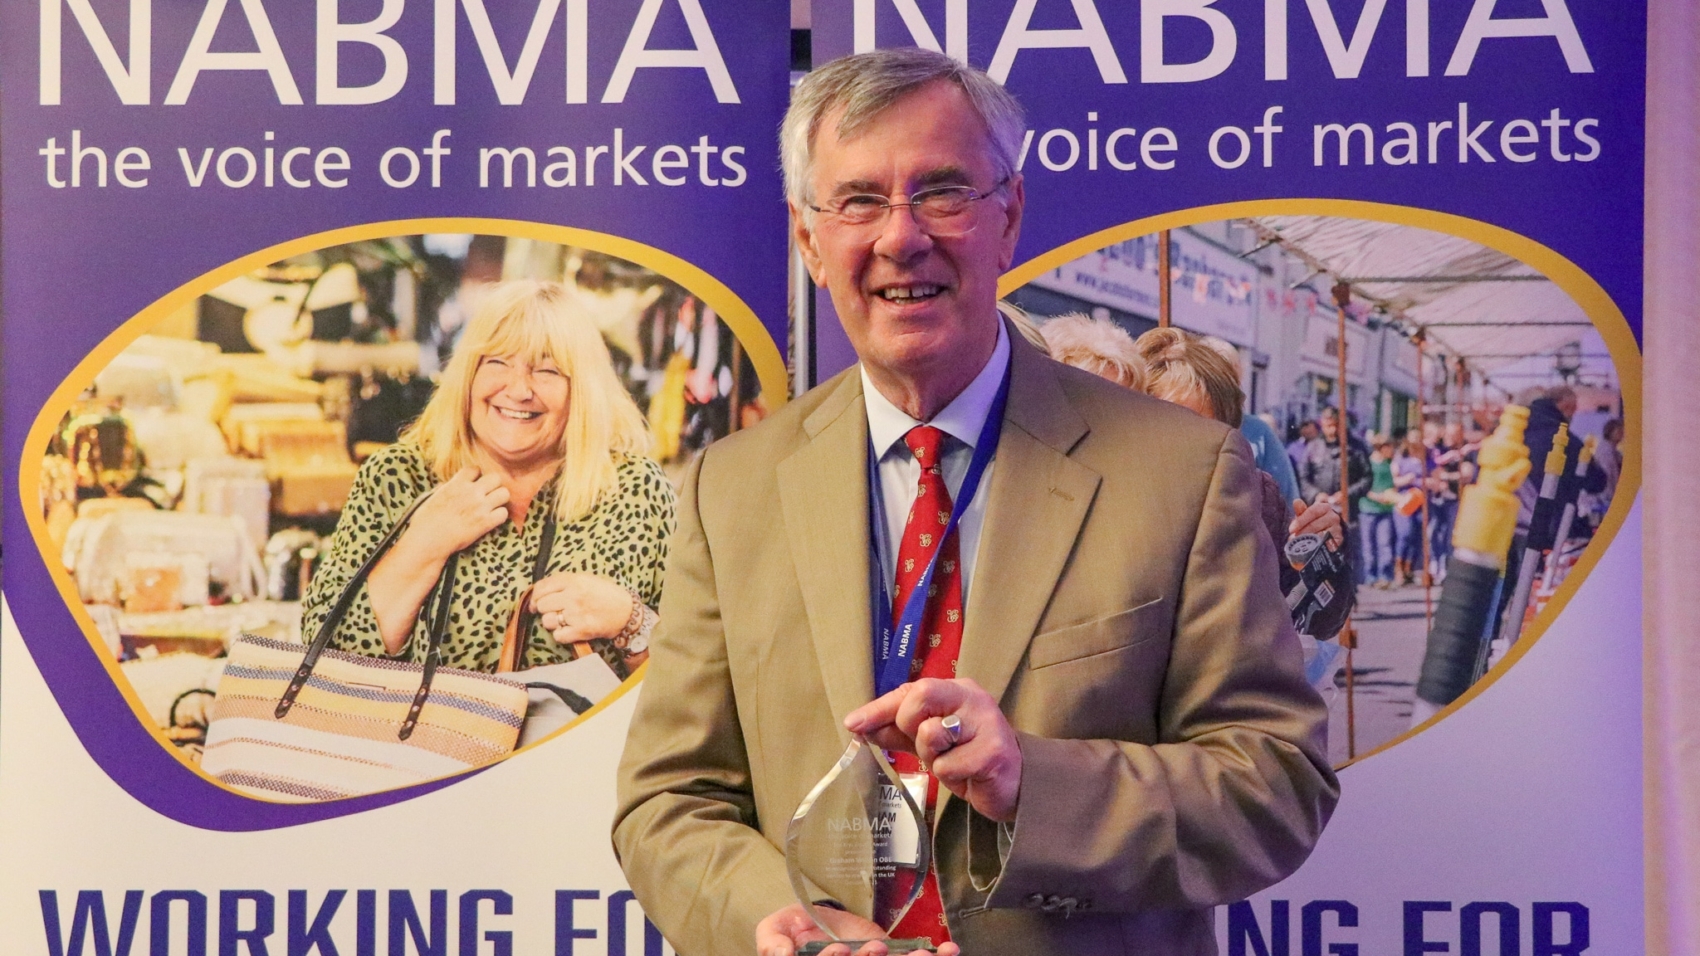 NABMA October Conference 2021 (24)